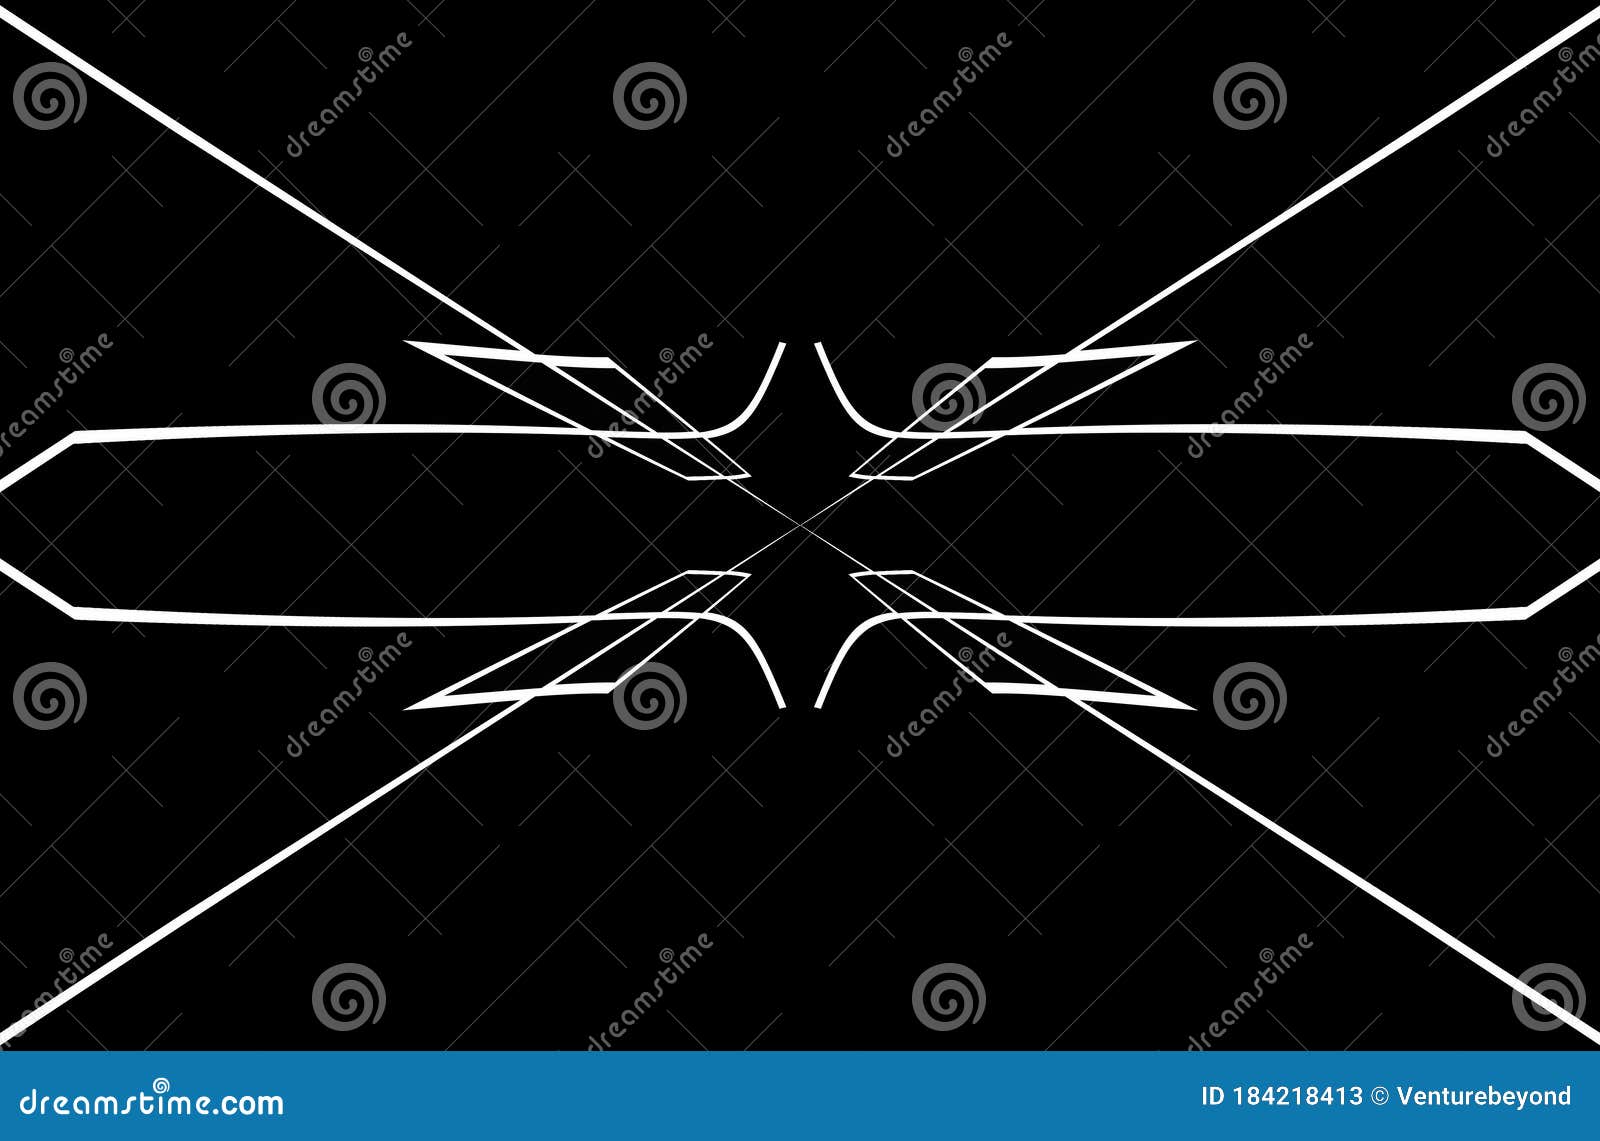 abstract art: glide path or target sight scope